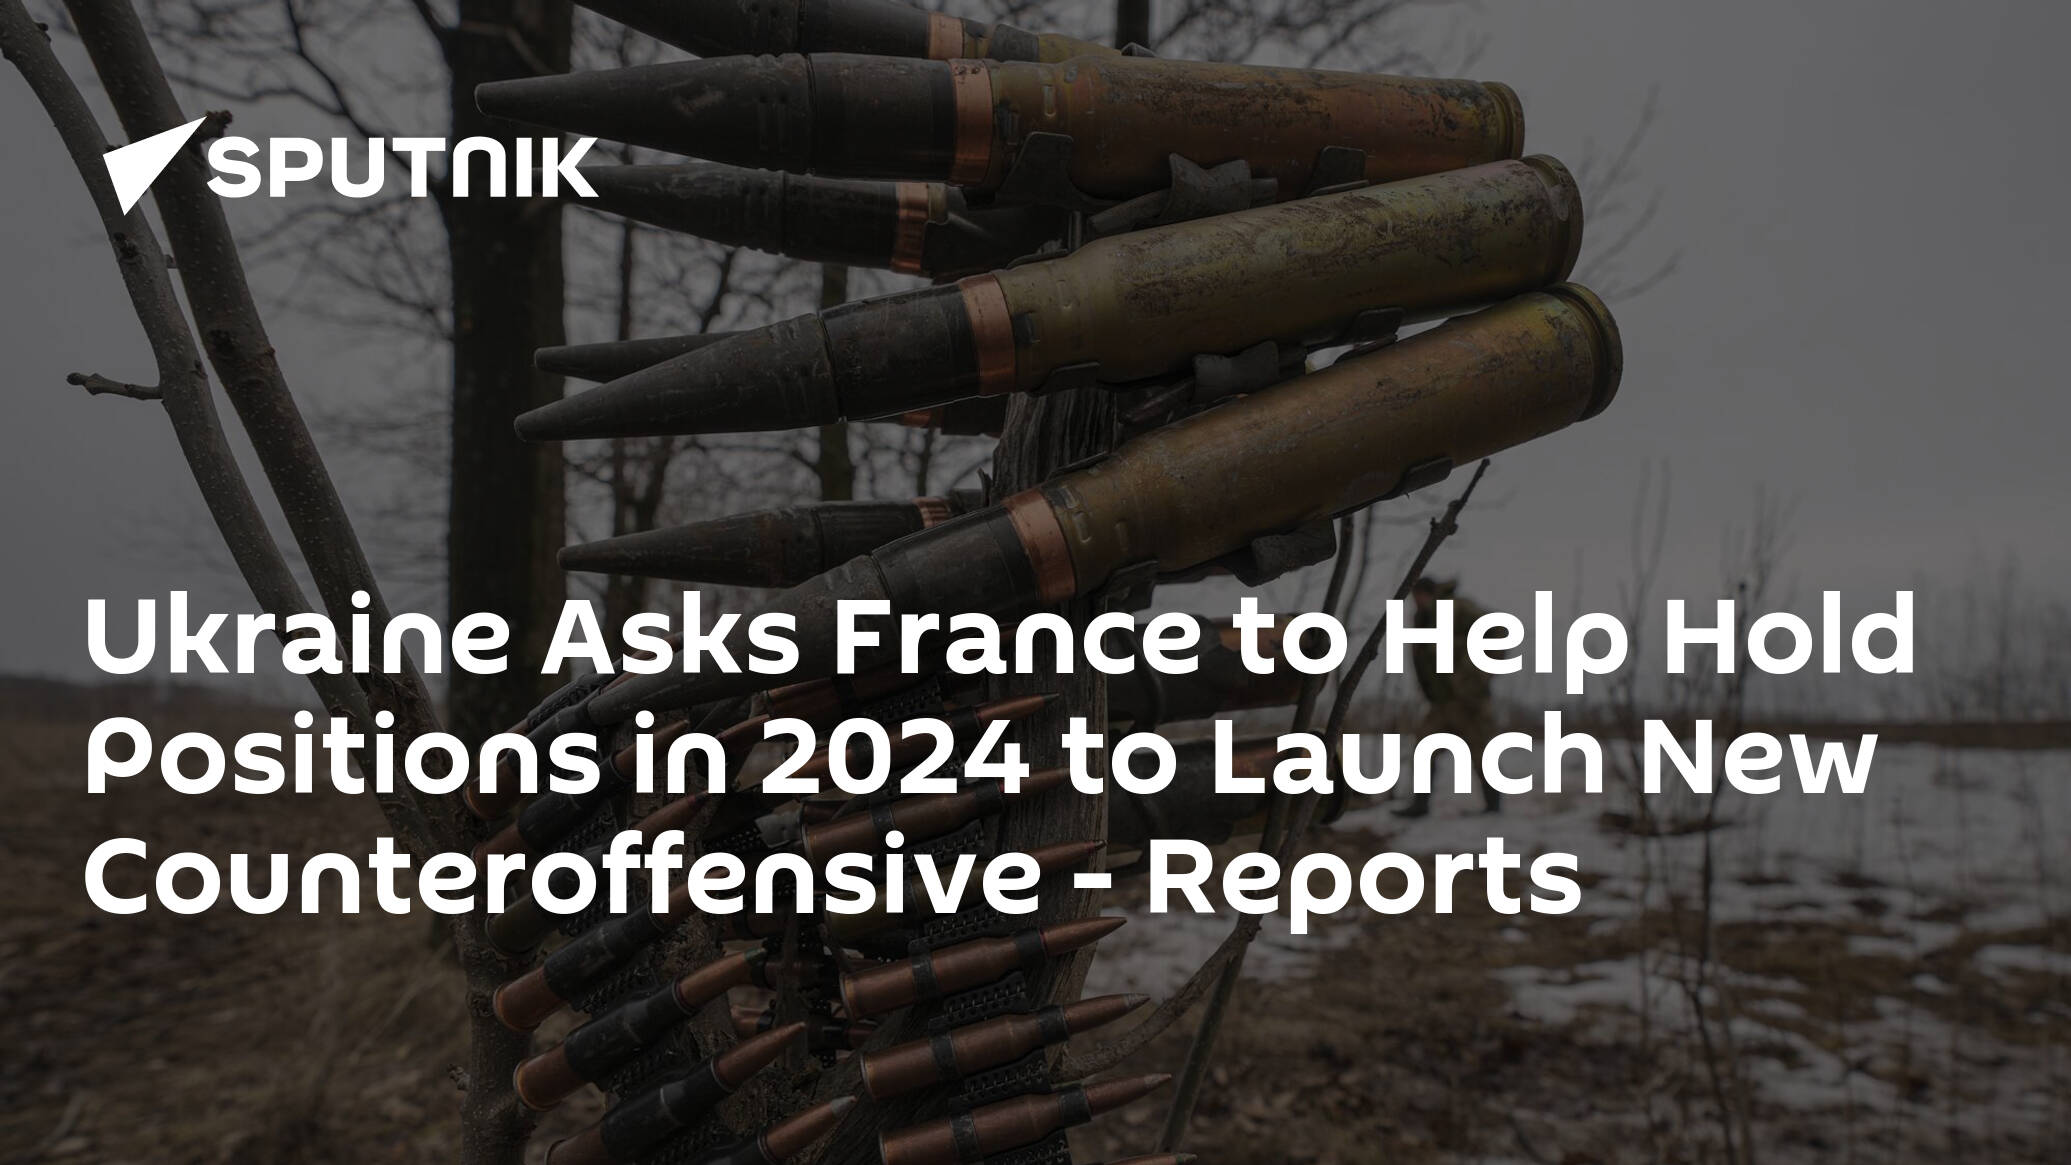 Ukraine Asks France to Help Hold Positions in 2024 to Launch New Counteroffensive – Reports